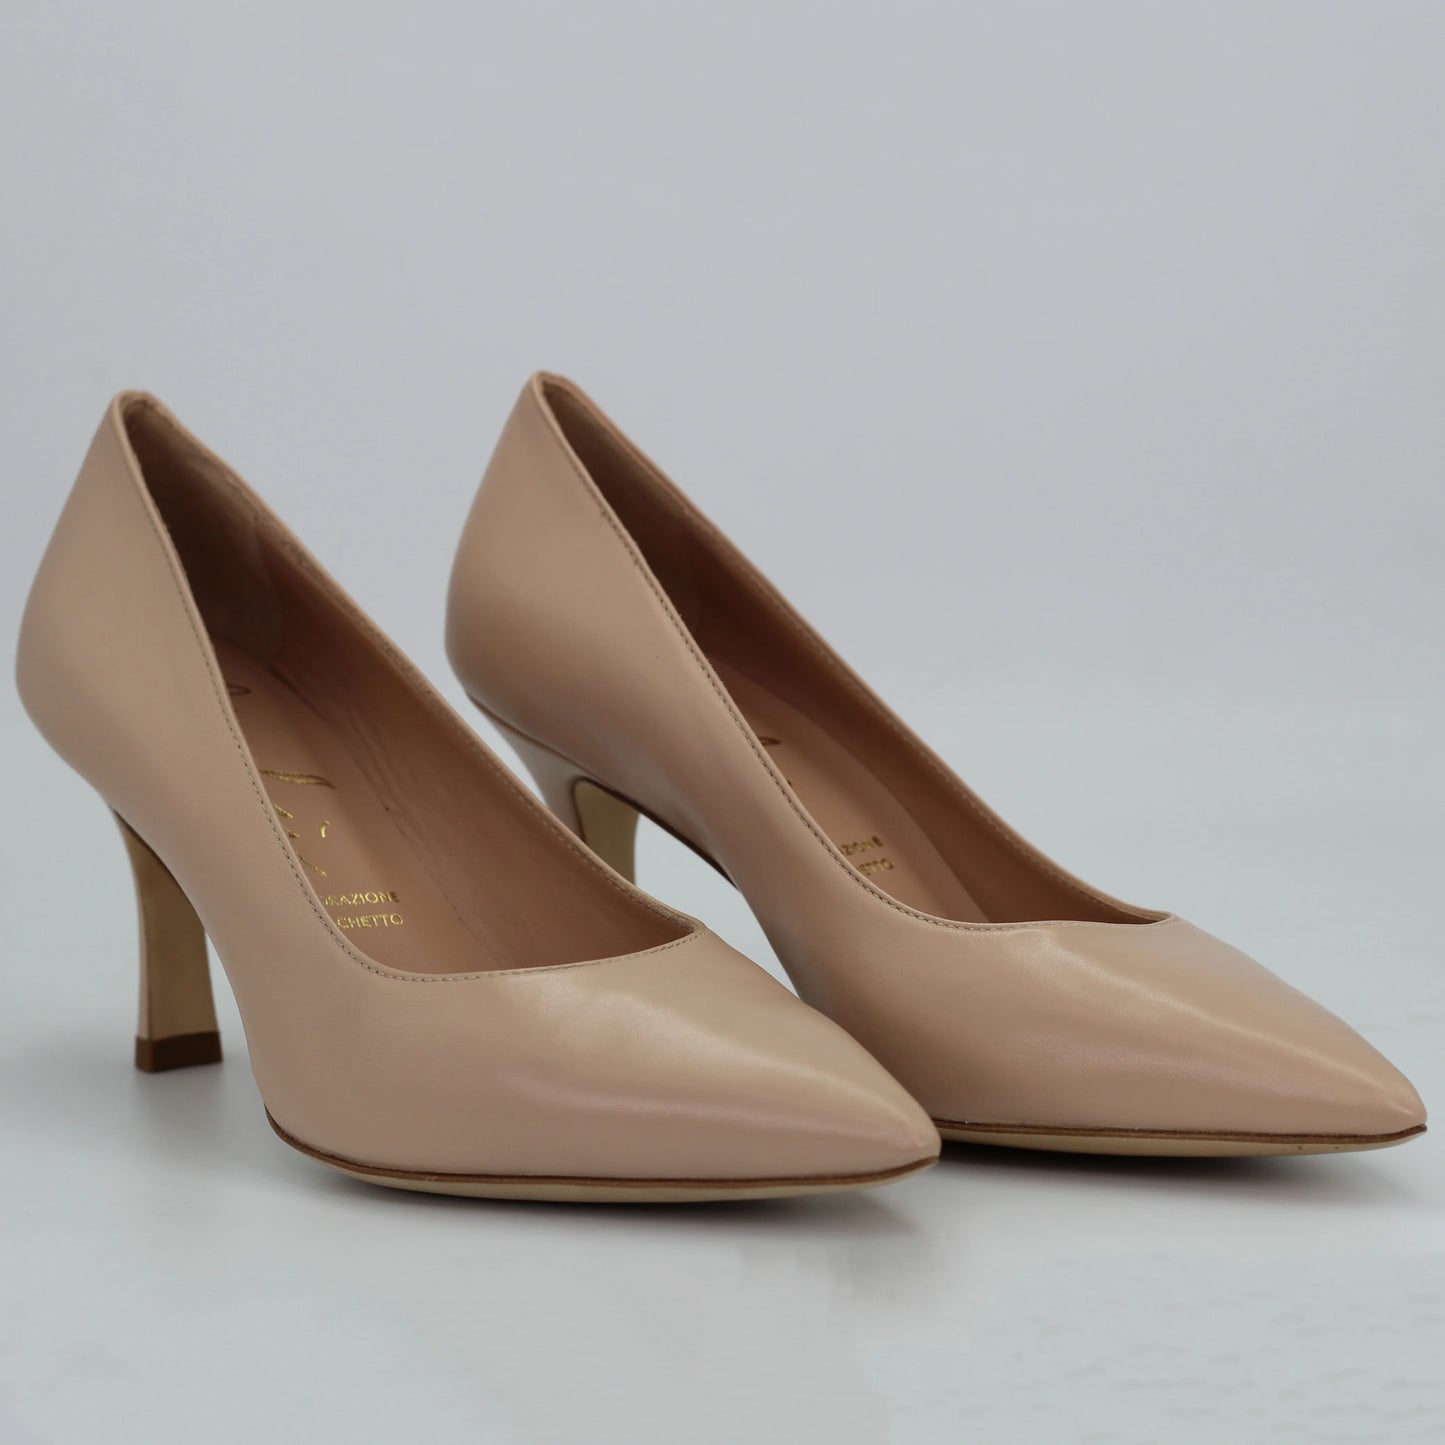 Shop Handmade Italian Leather court heel in nude (MA3771) or browse our range of hand-made Italian shoes in leather or suede in-store at Aliverti Cape Town, or shop online. We deliver in South Africa & offer multiple payment plans as well as accept multiple safe & secure payment methods.